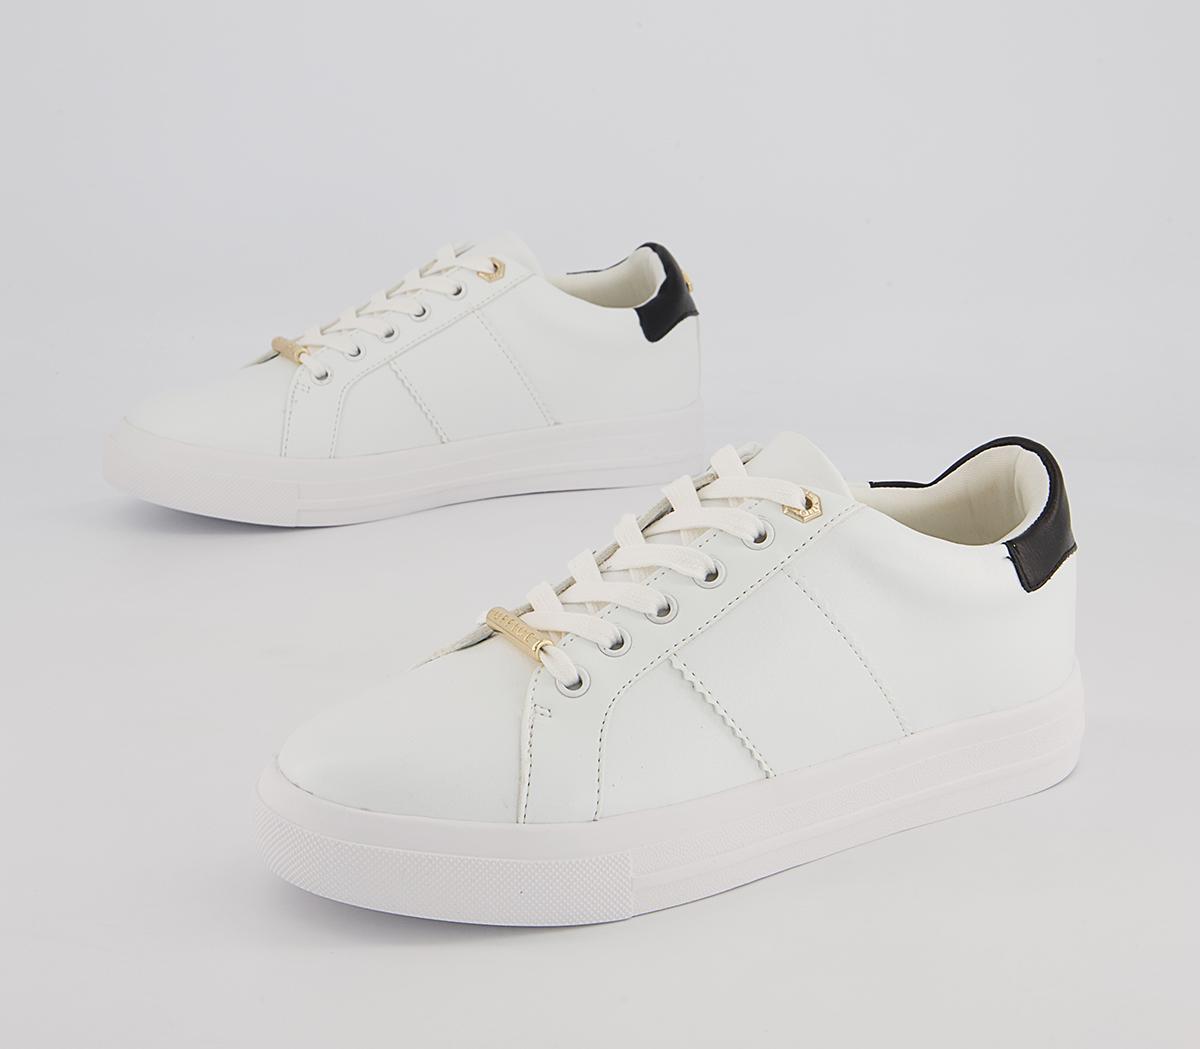 OFFICE Focus Lace Up Trainers White Black Mix - OFFICE Girl